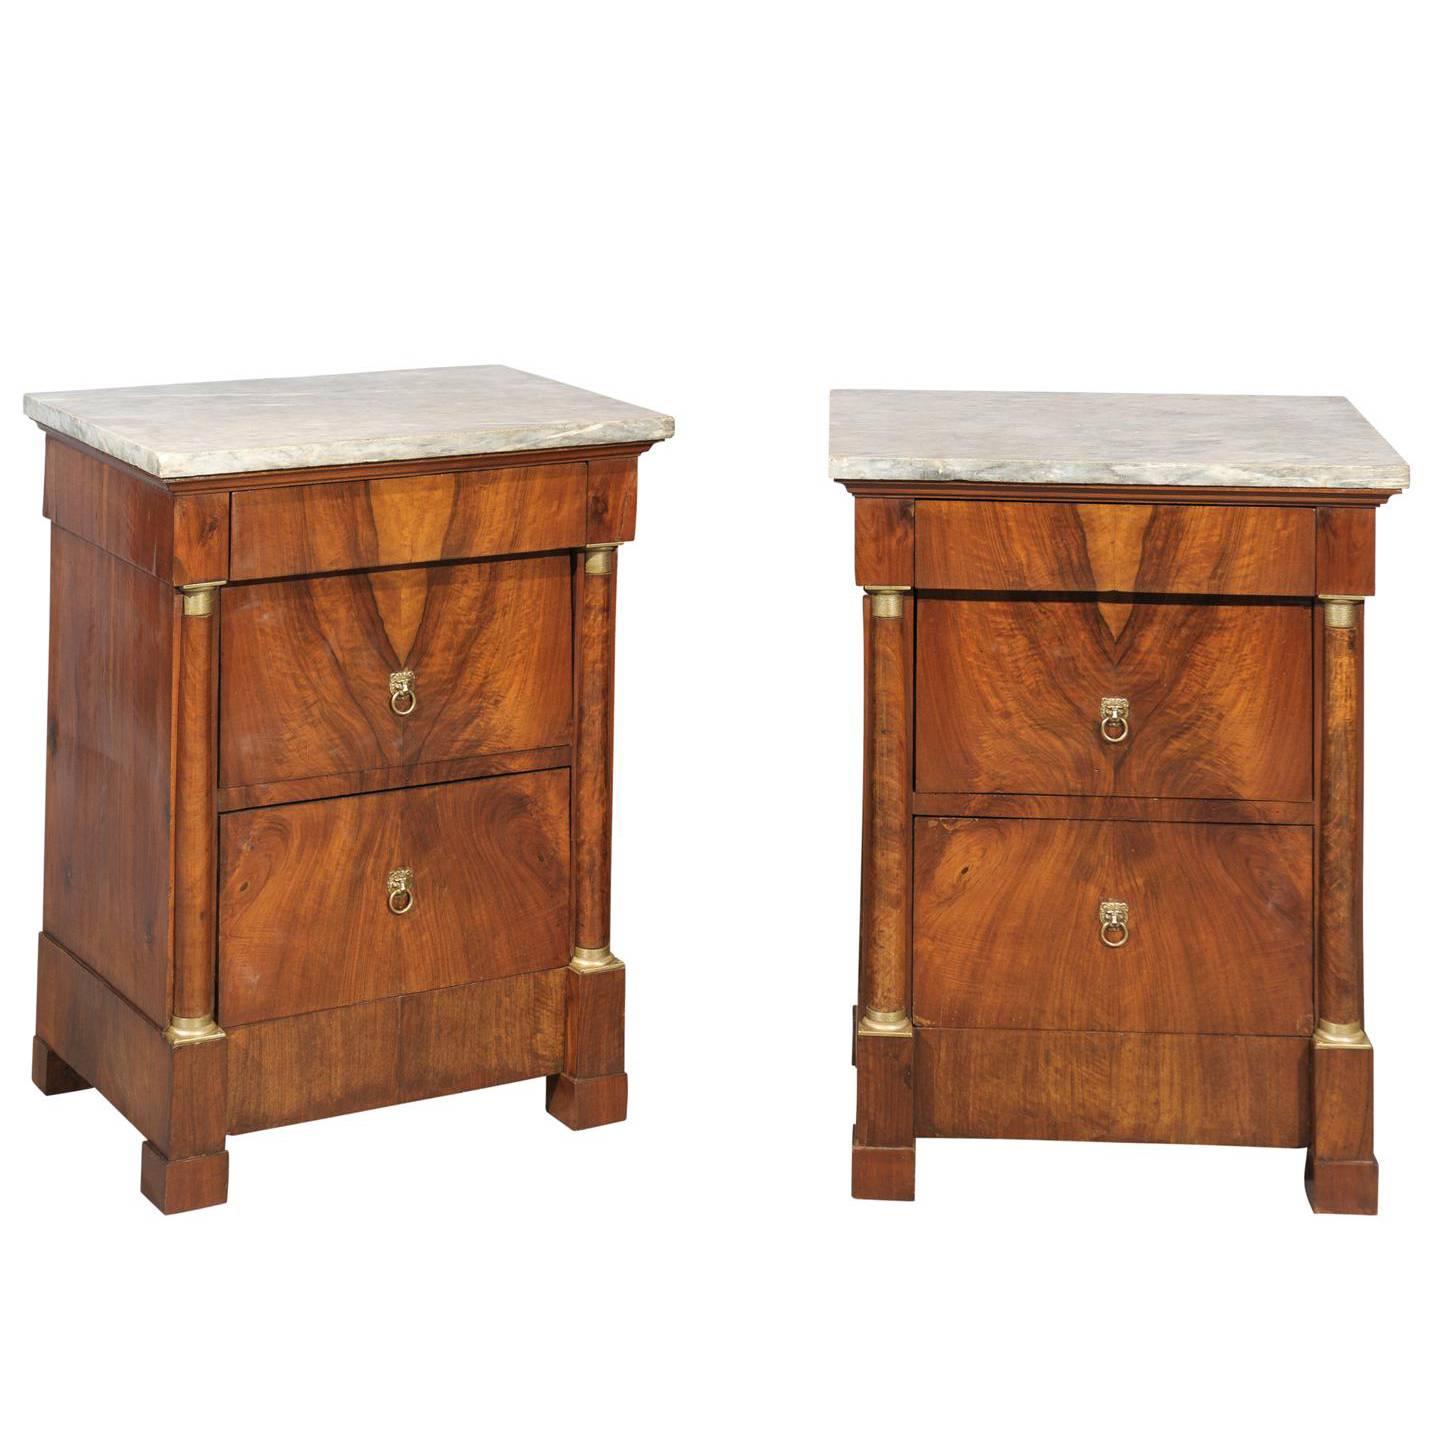 Pair of Bedside Empire Walnut Commodes with Grey Marble Tops